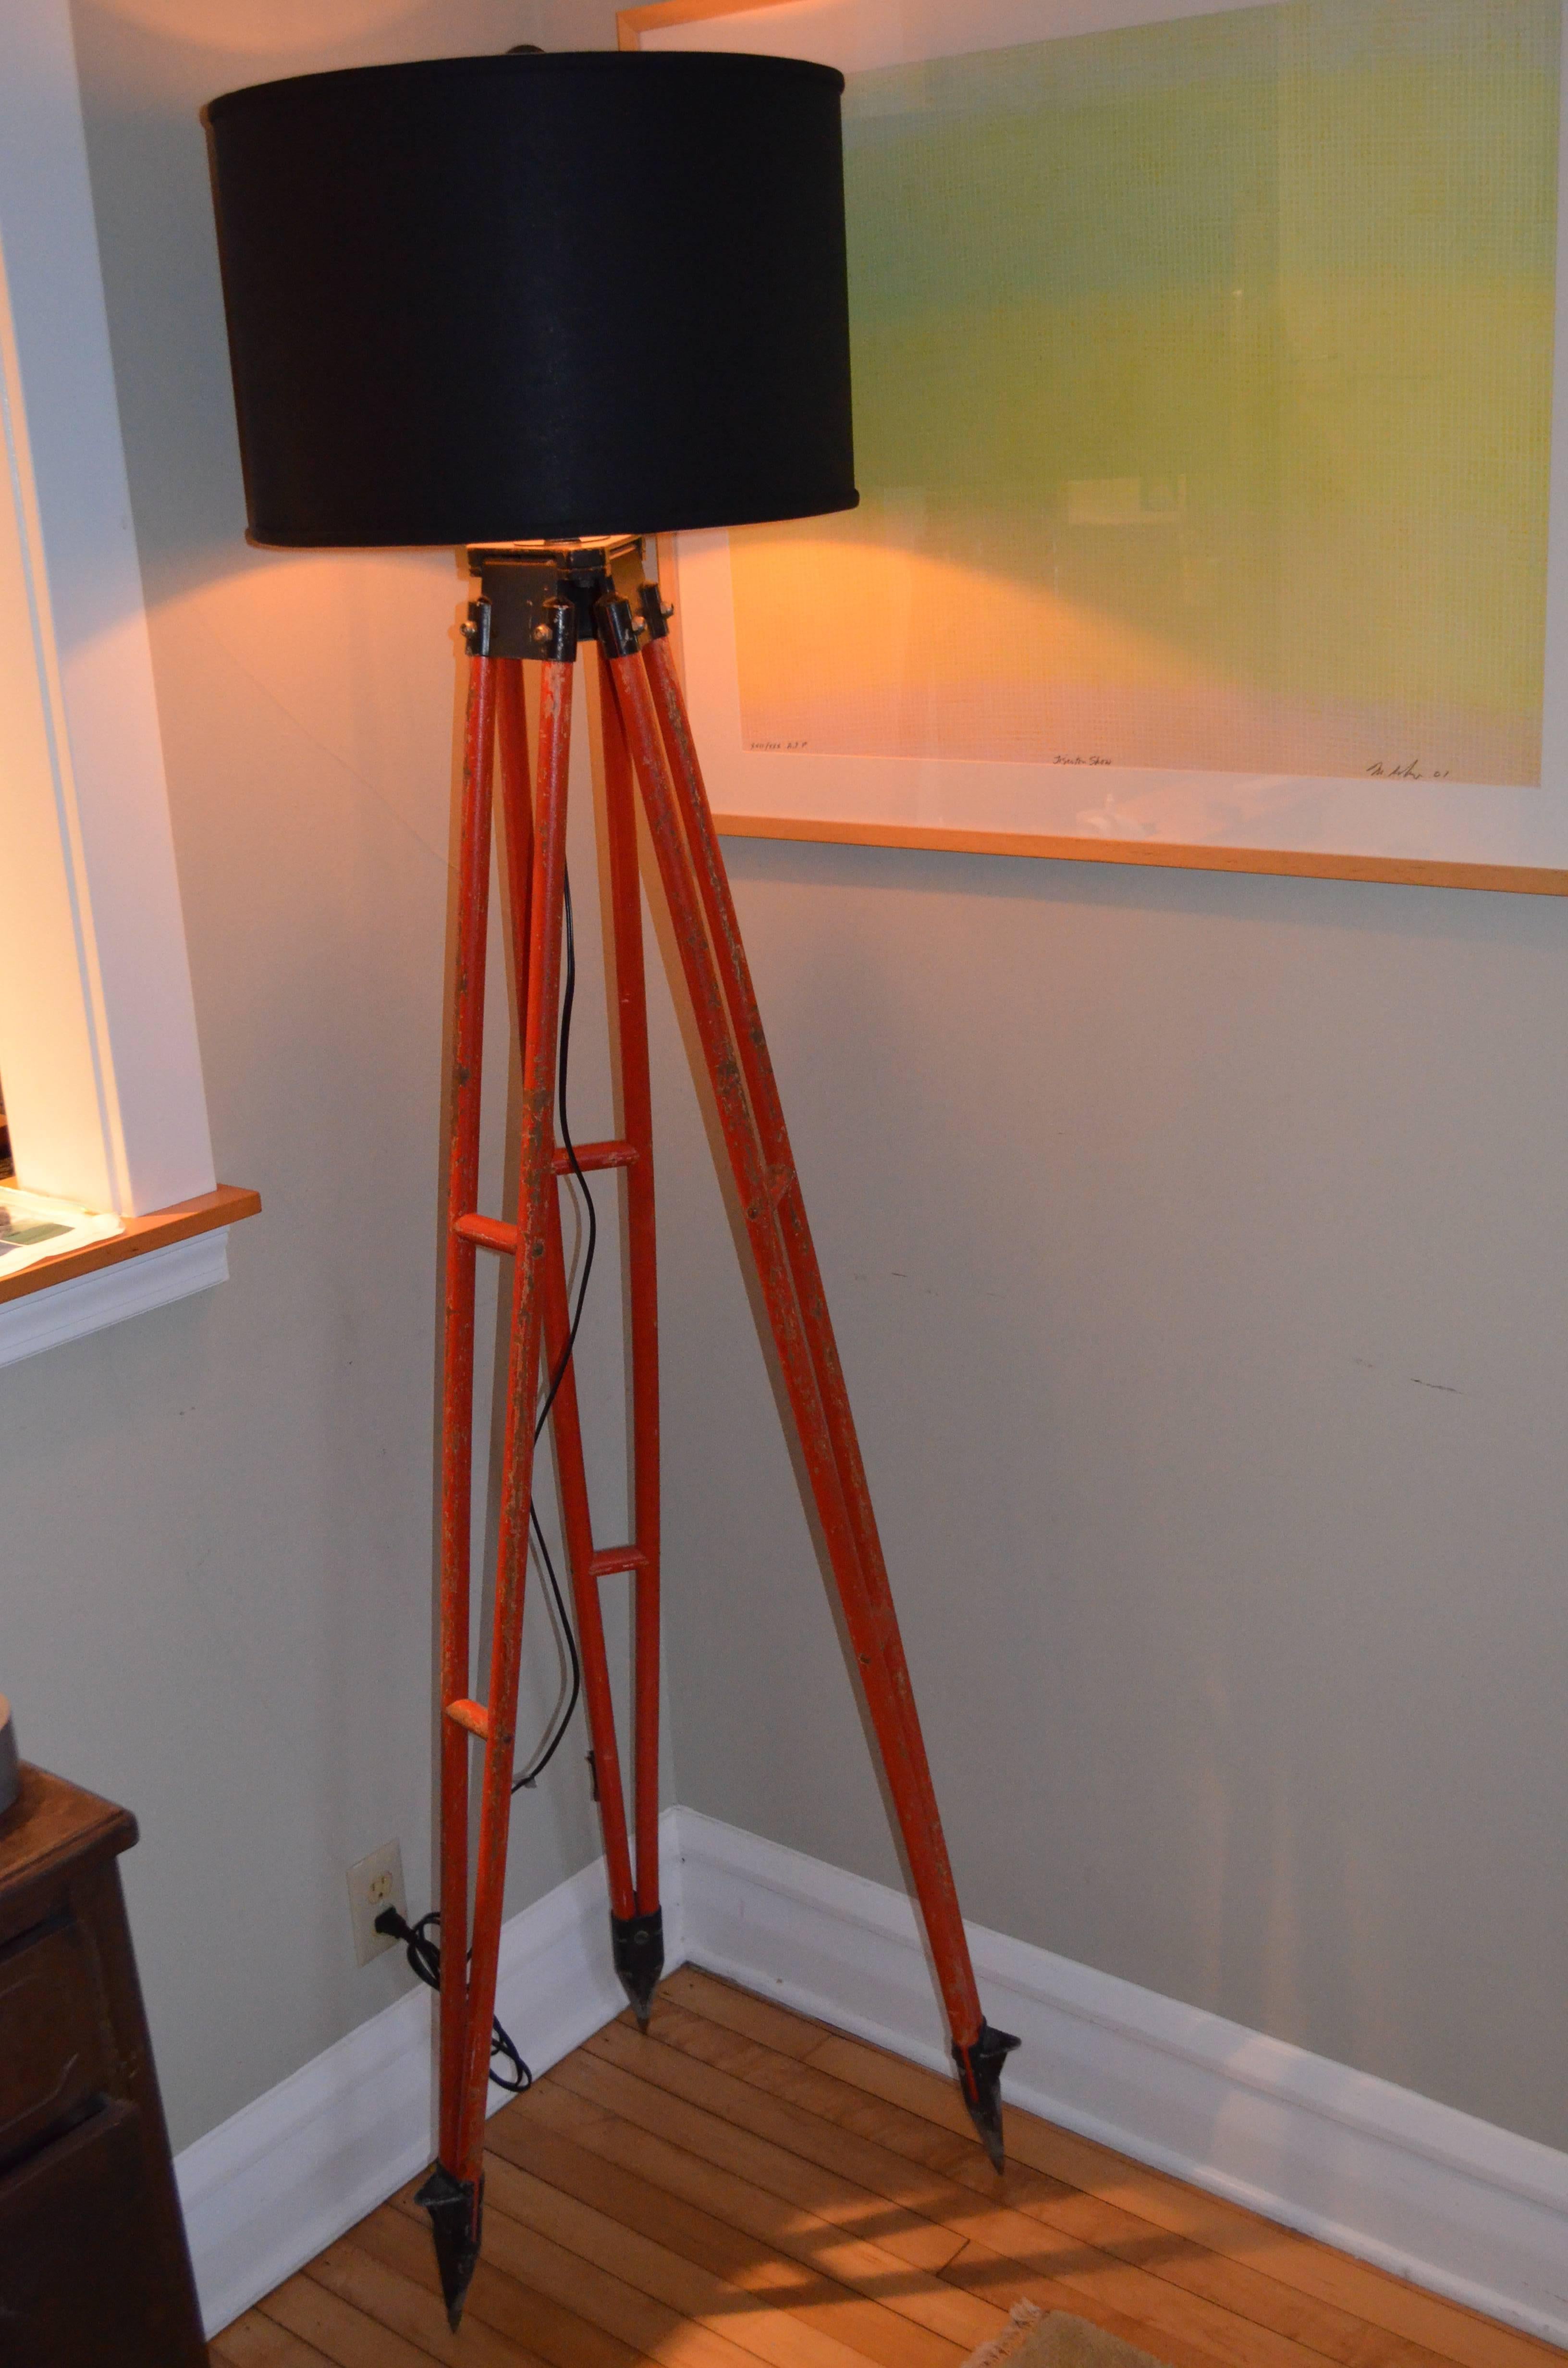 Floor lamp from surveyor's tripod stands statuesque on steel-tipped feet and wooden legs in as-found orange paint that stands out in the field. Professionally wired with UL-approved components including ten-foot black cord, three-way switch socket